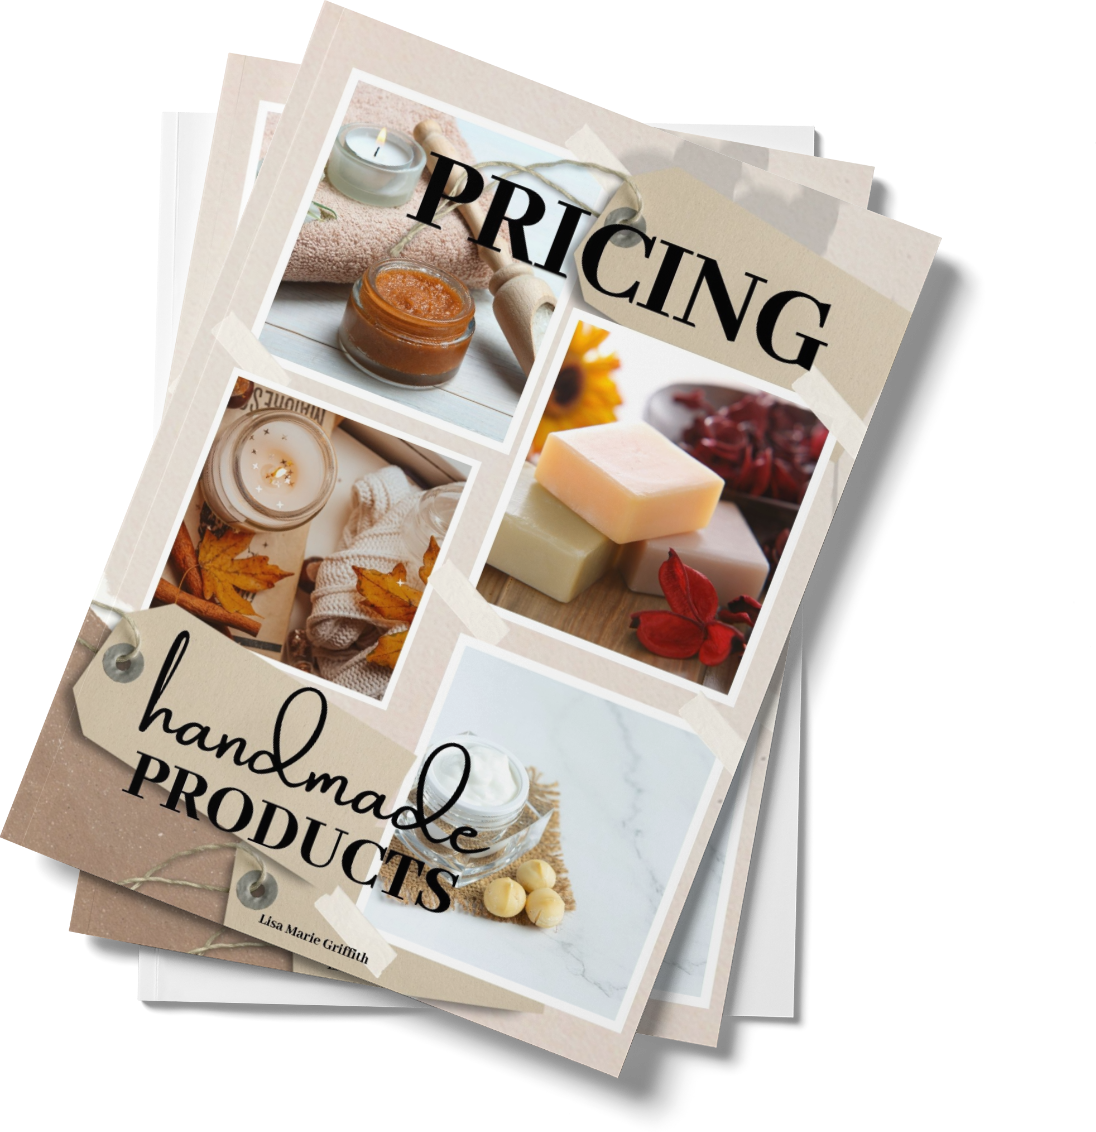 Pricing Handmade Products E book